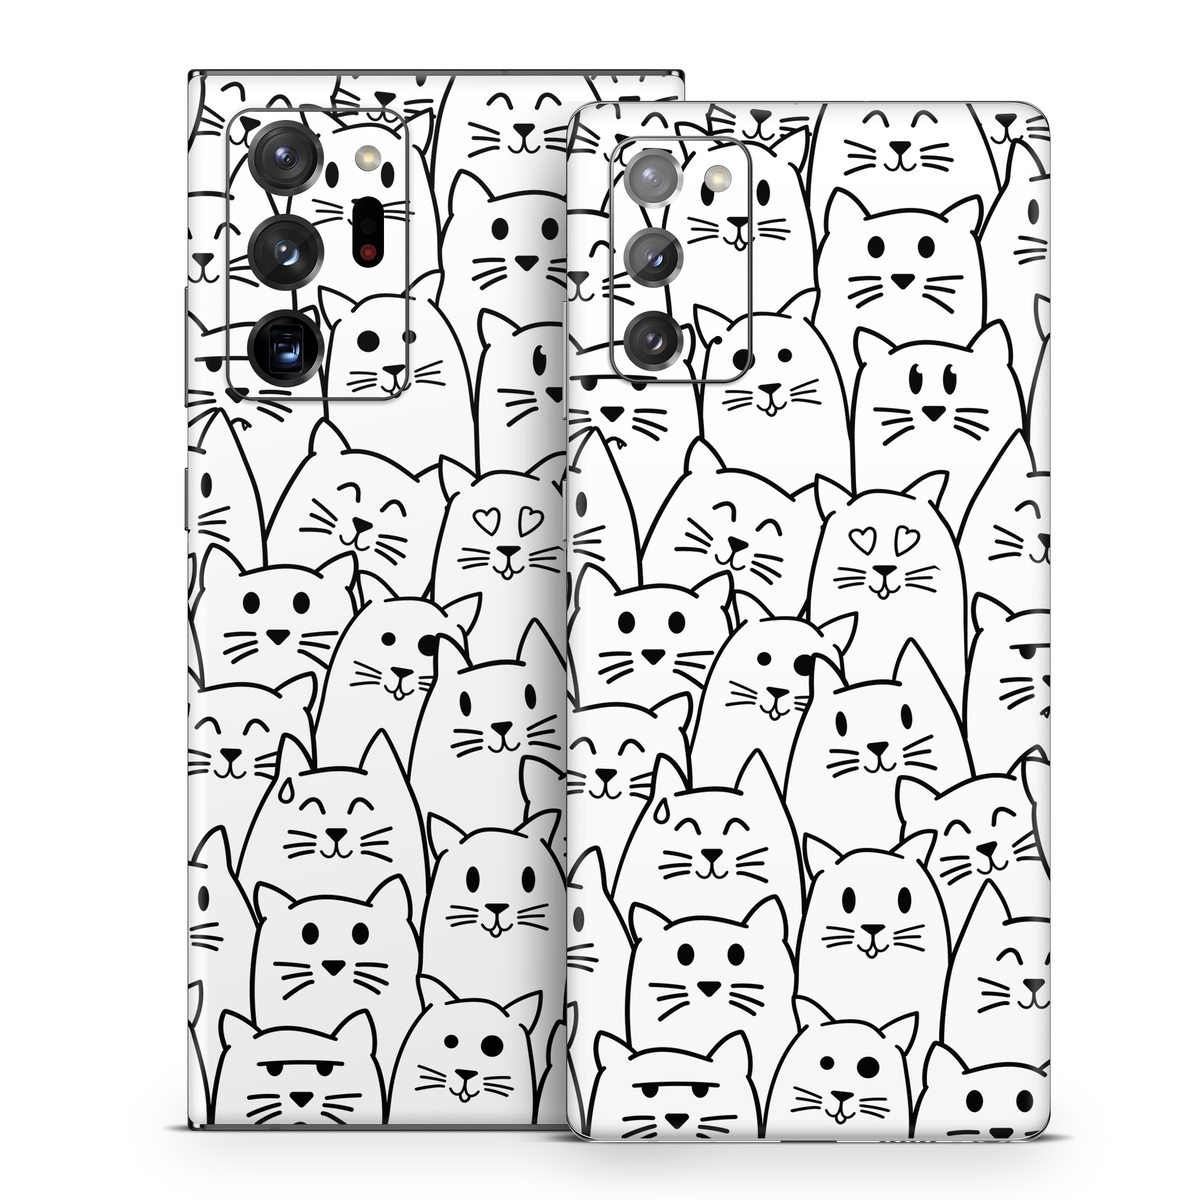 Samsung Galaxy Note 20 Series Skin design of White, Line art, Text, Black, Pattern, Black-and-white, Line, Design, Font, Organism, with white, black colors